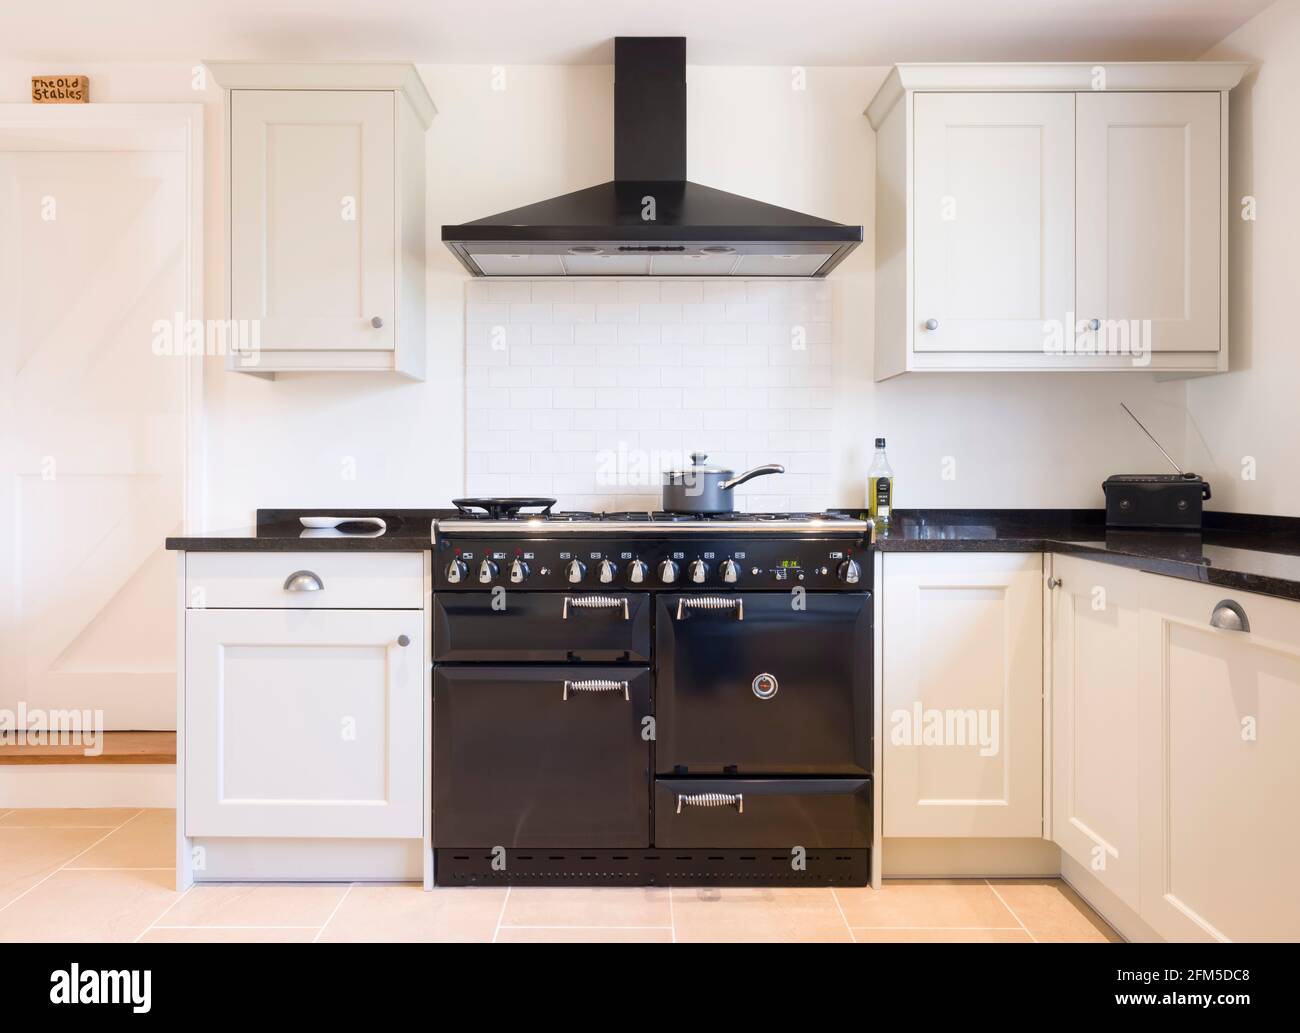 Modern modular kitchen interior in black and off white, with range cooker and chimney extractor hood. UK painted wood farmhouse kitchen design. Stock Photo